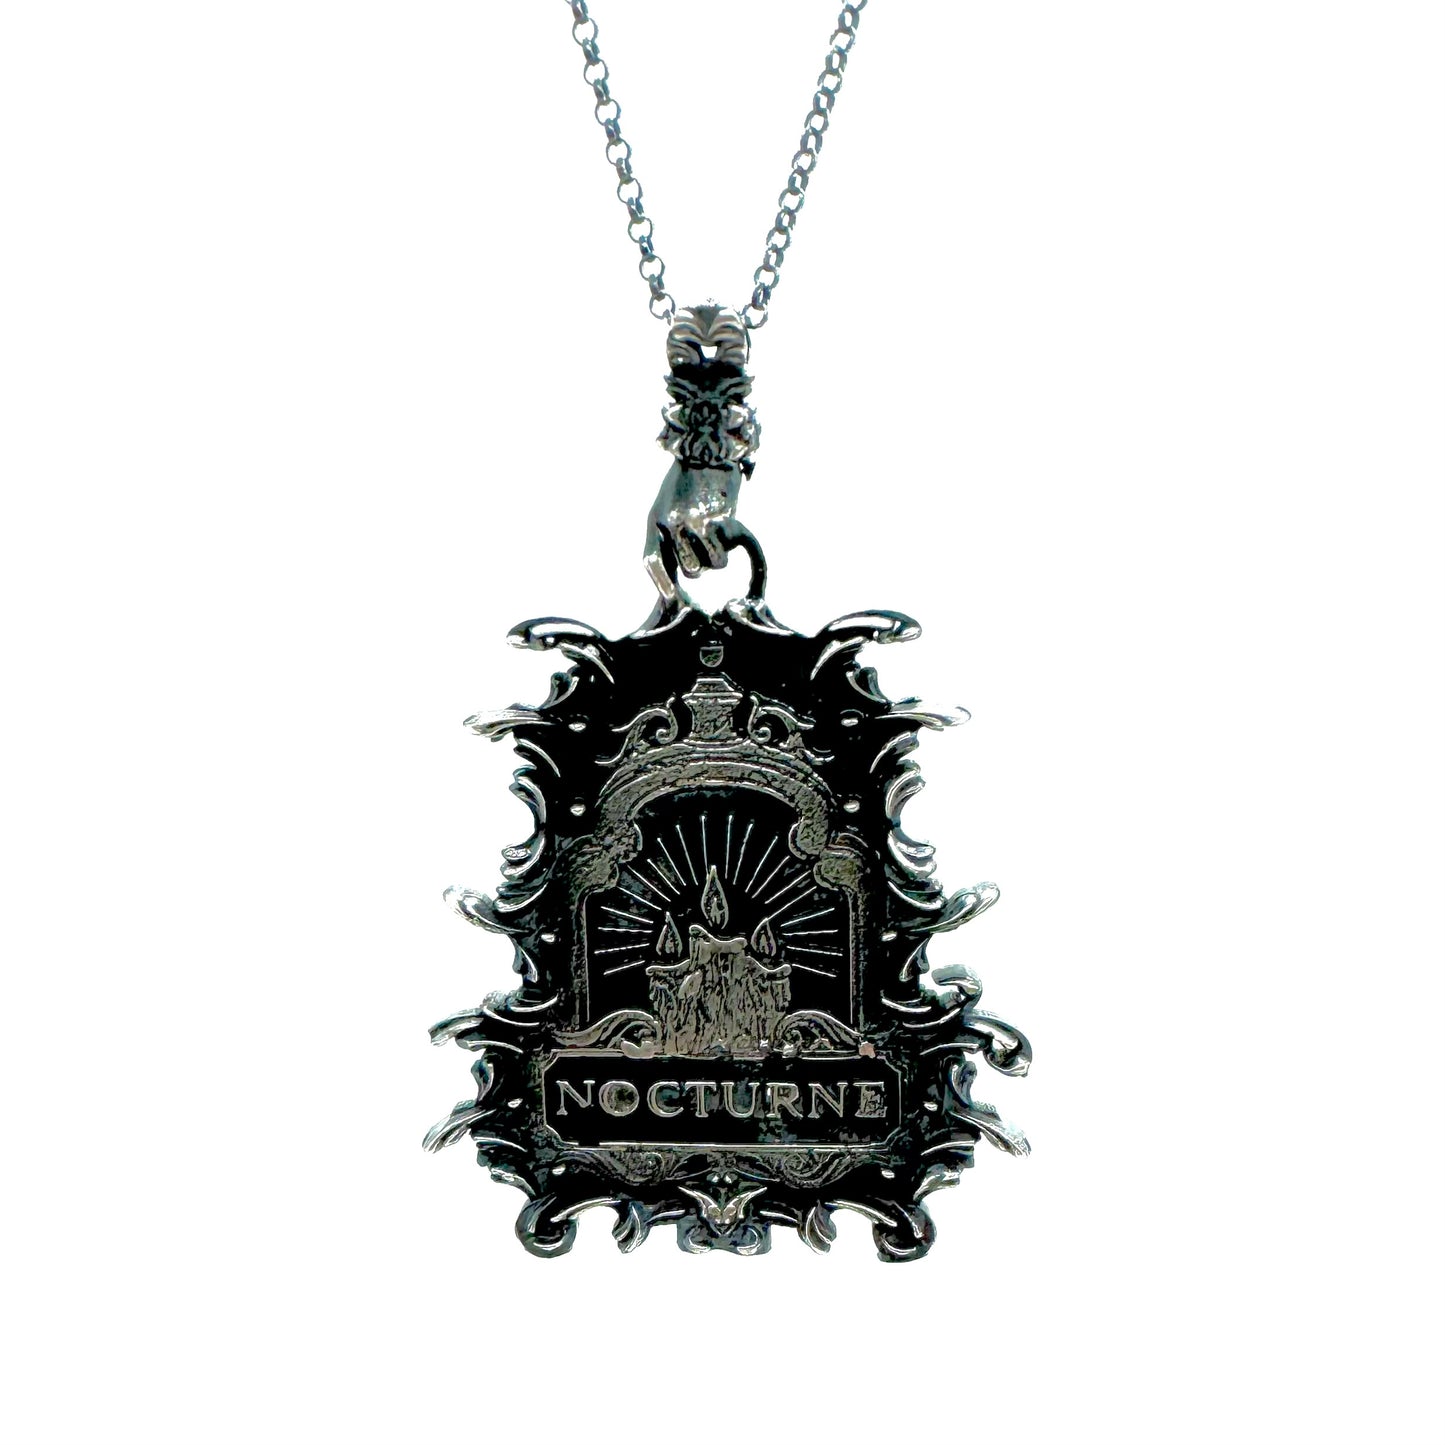 Exclusive Nocturne Collaboration Pendant in Sterling Silver or Bronze